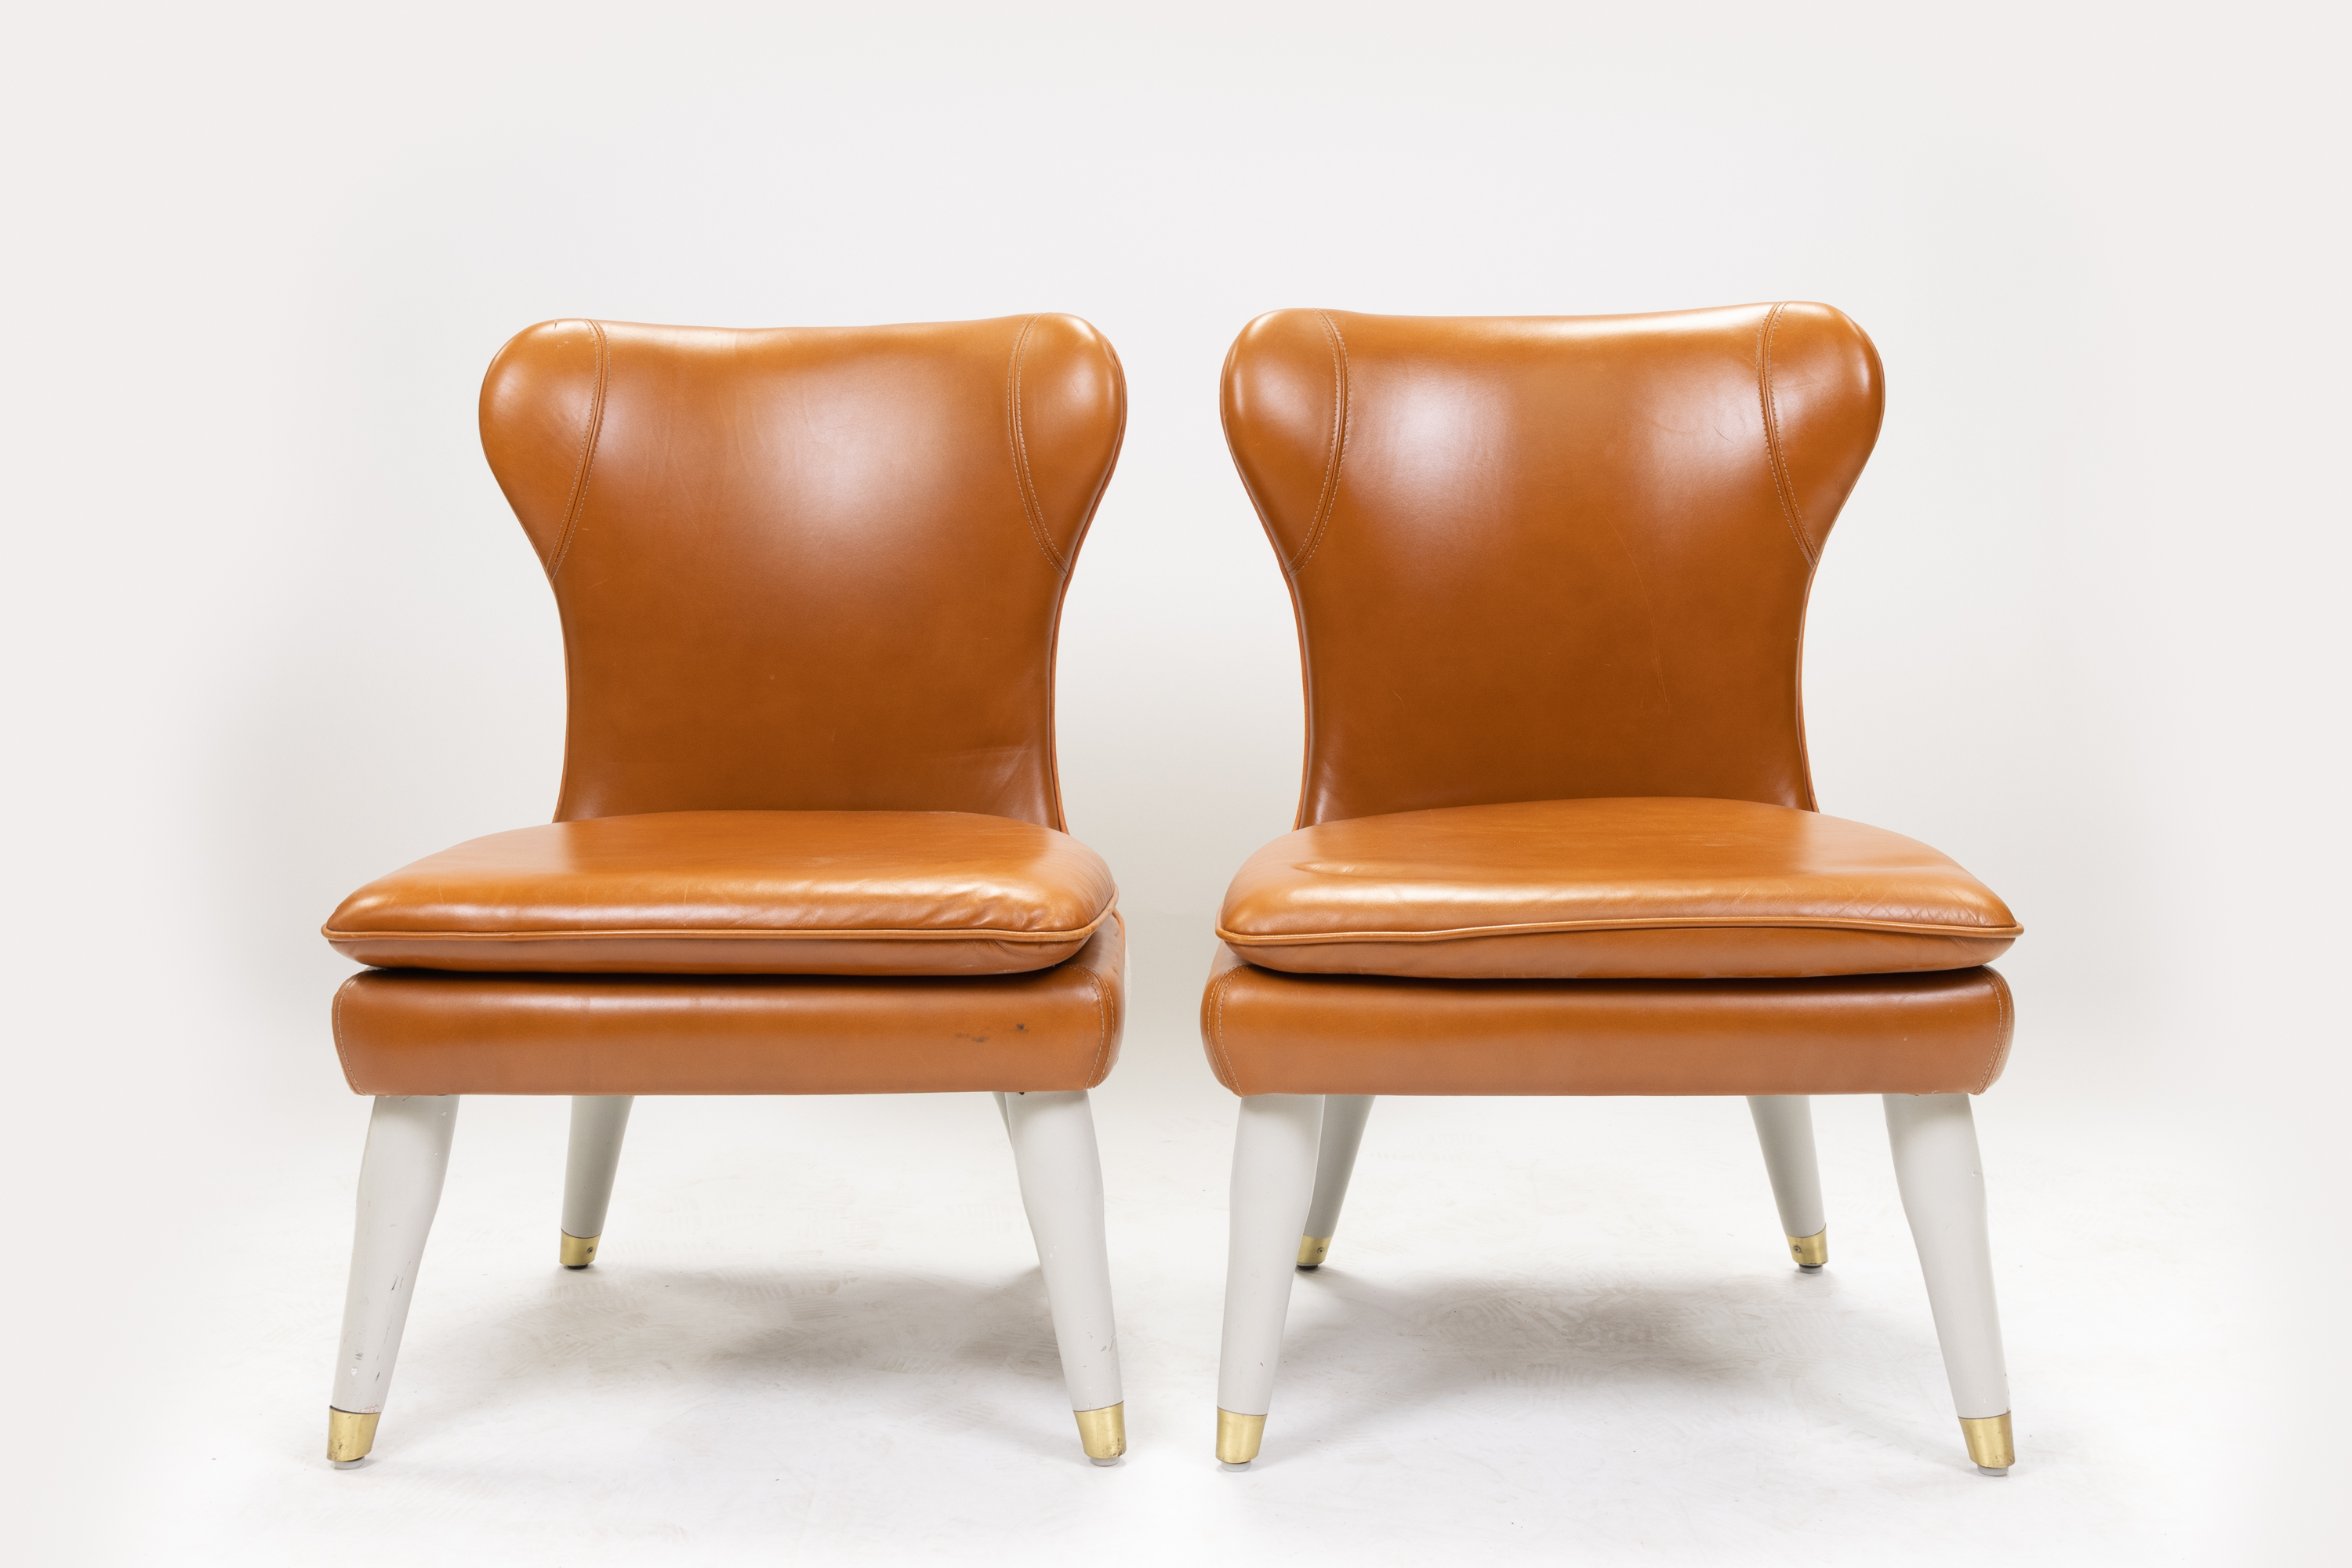 Pair of Ben Whistler Leather Chairs Designed for The Berkeley - Image 2 of 5